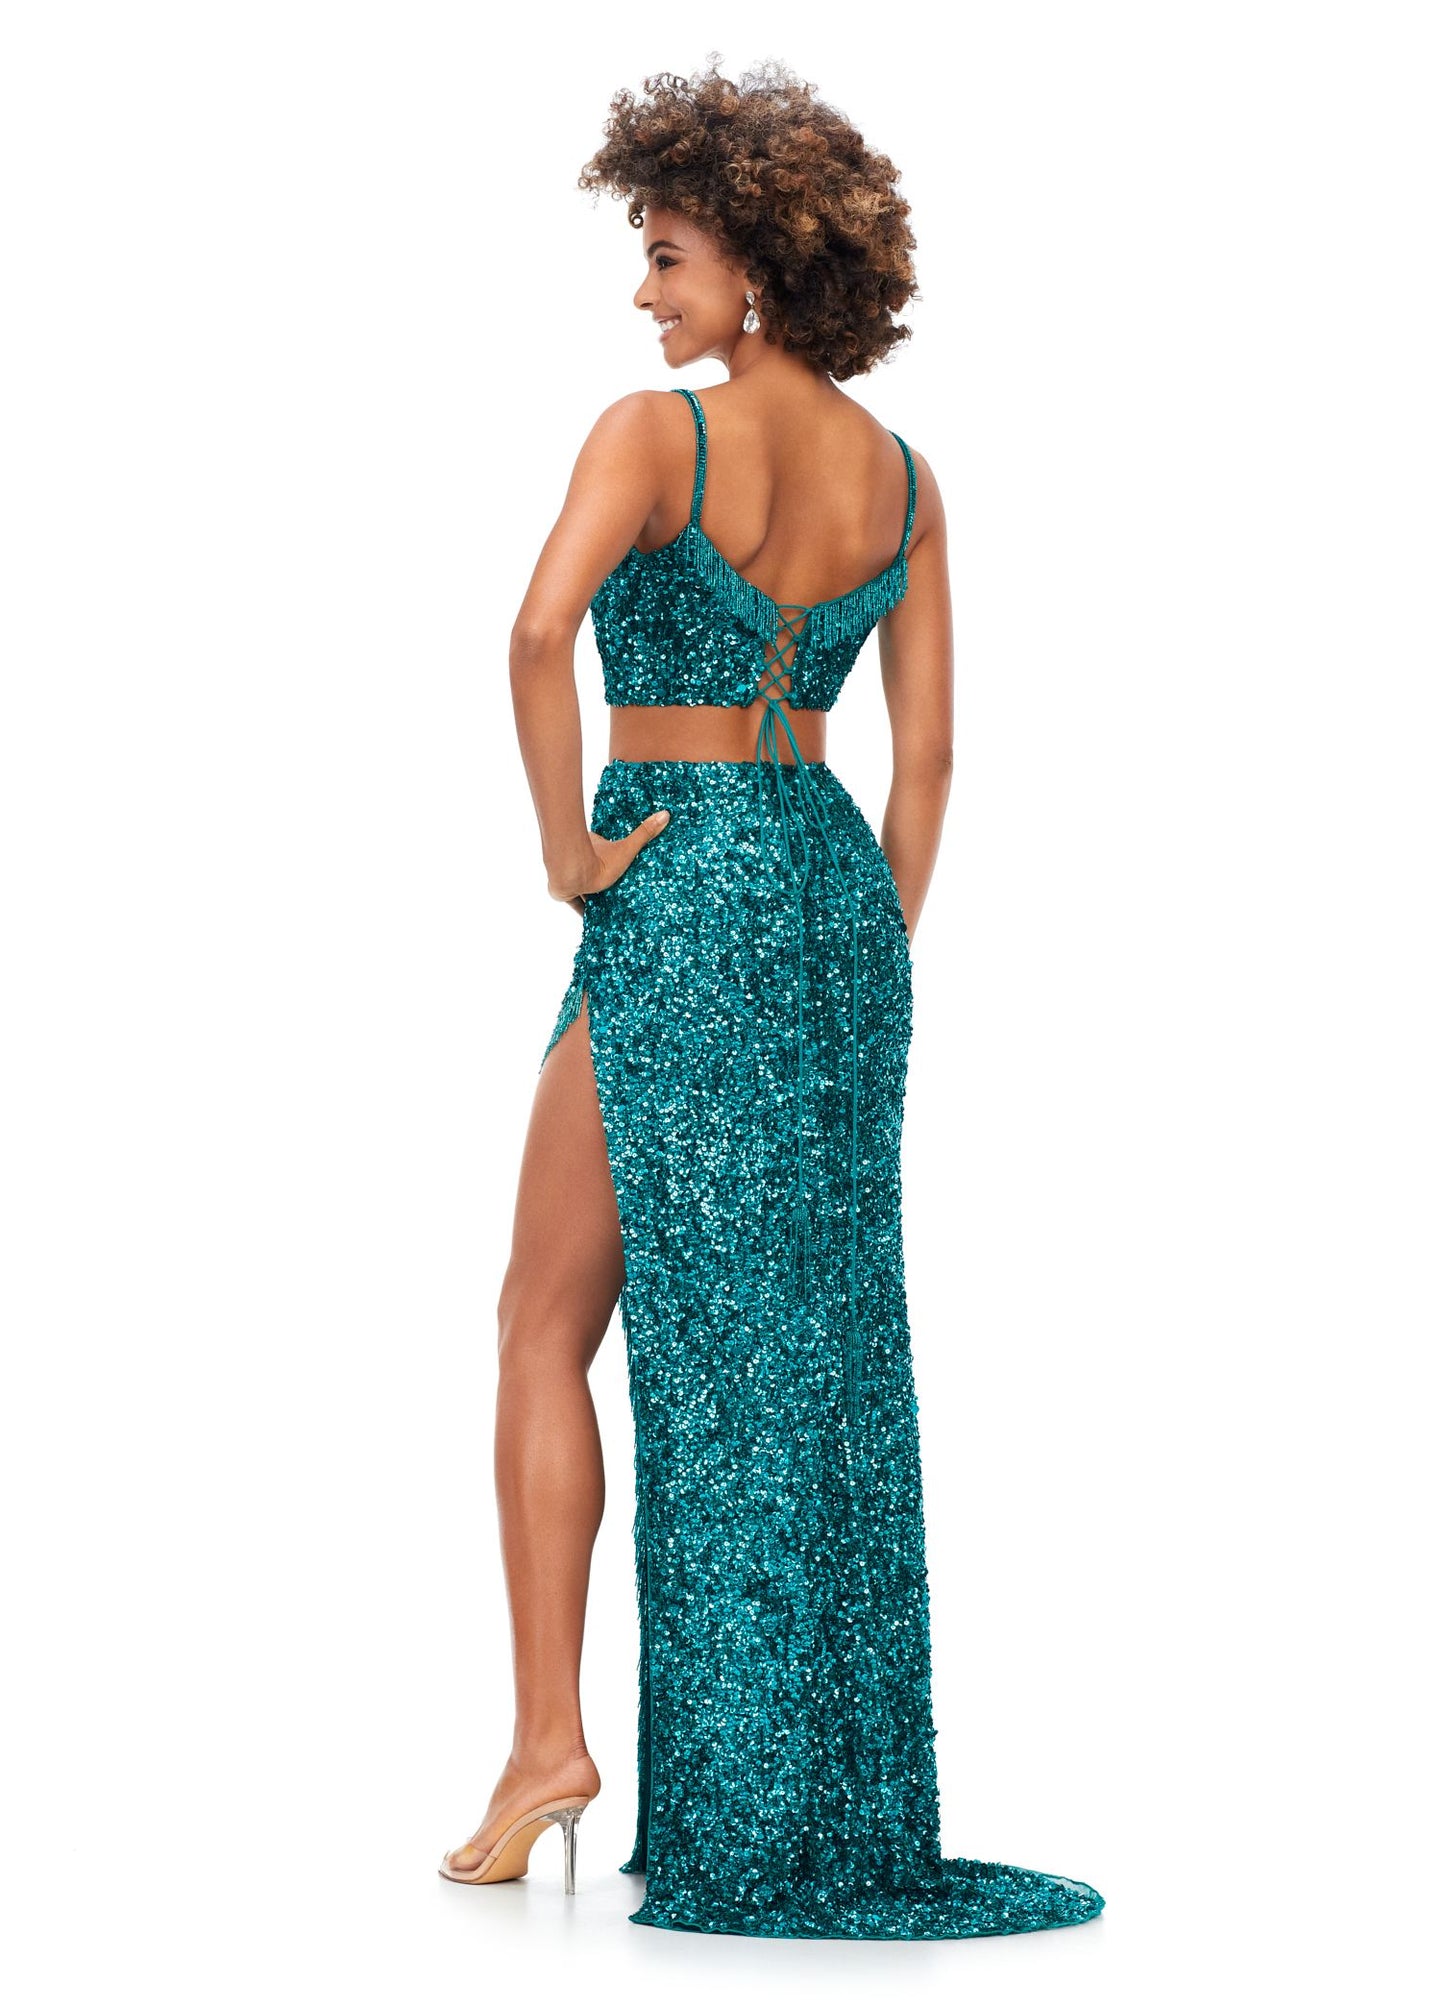 Ashley Lauren 11370 Sequin Two Piece Prom Dress with Fringe